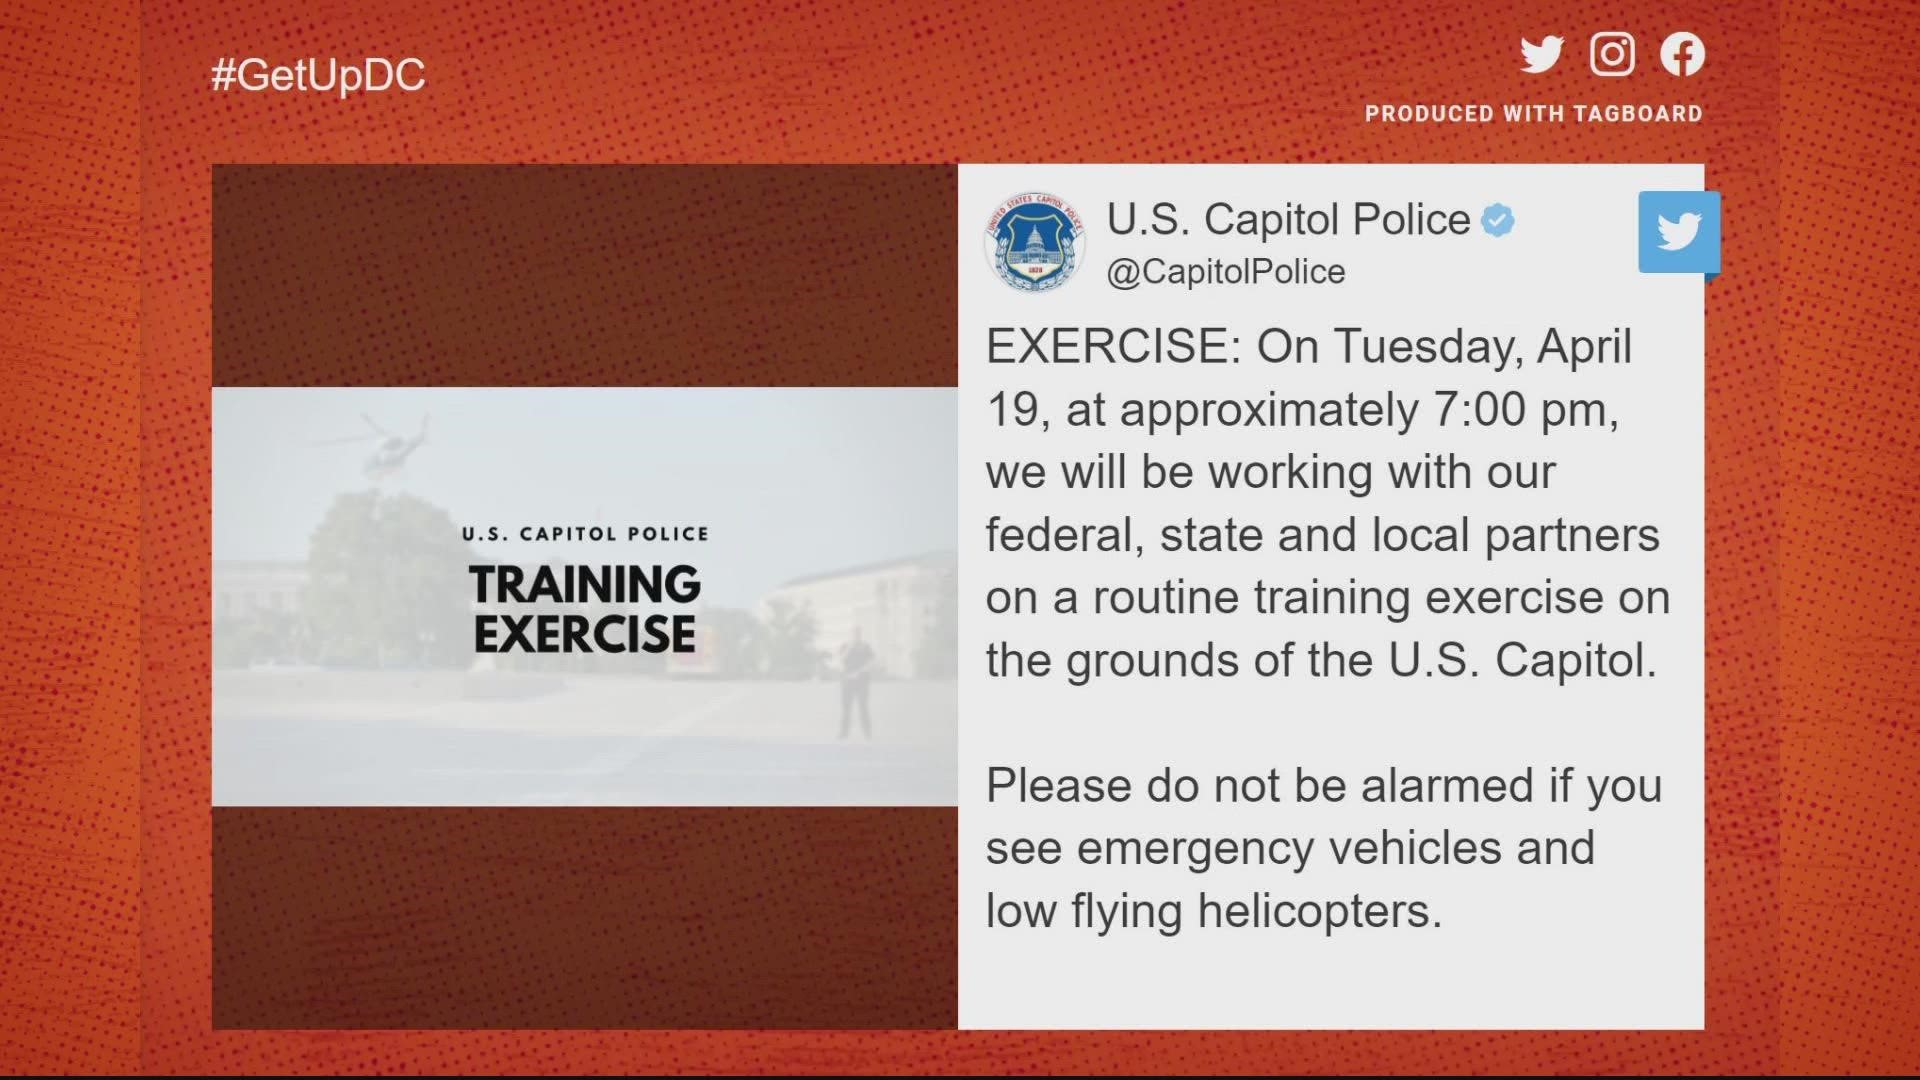 Police are giving to heads up to residents not to be concerned about a training exercise Tuesday, April 19.